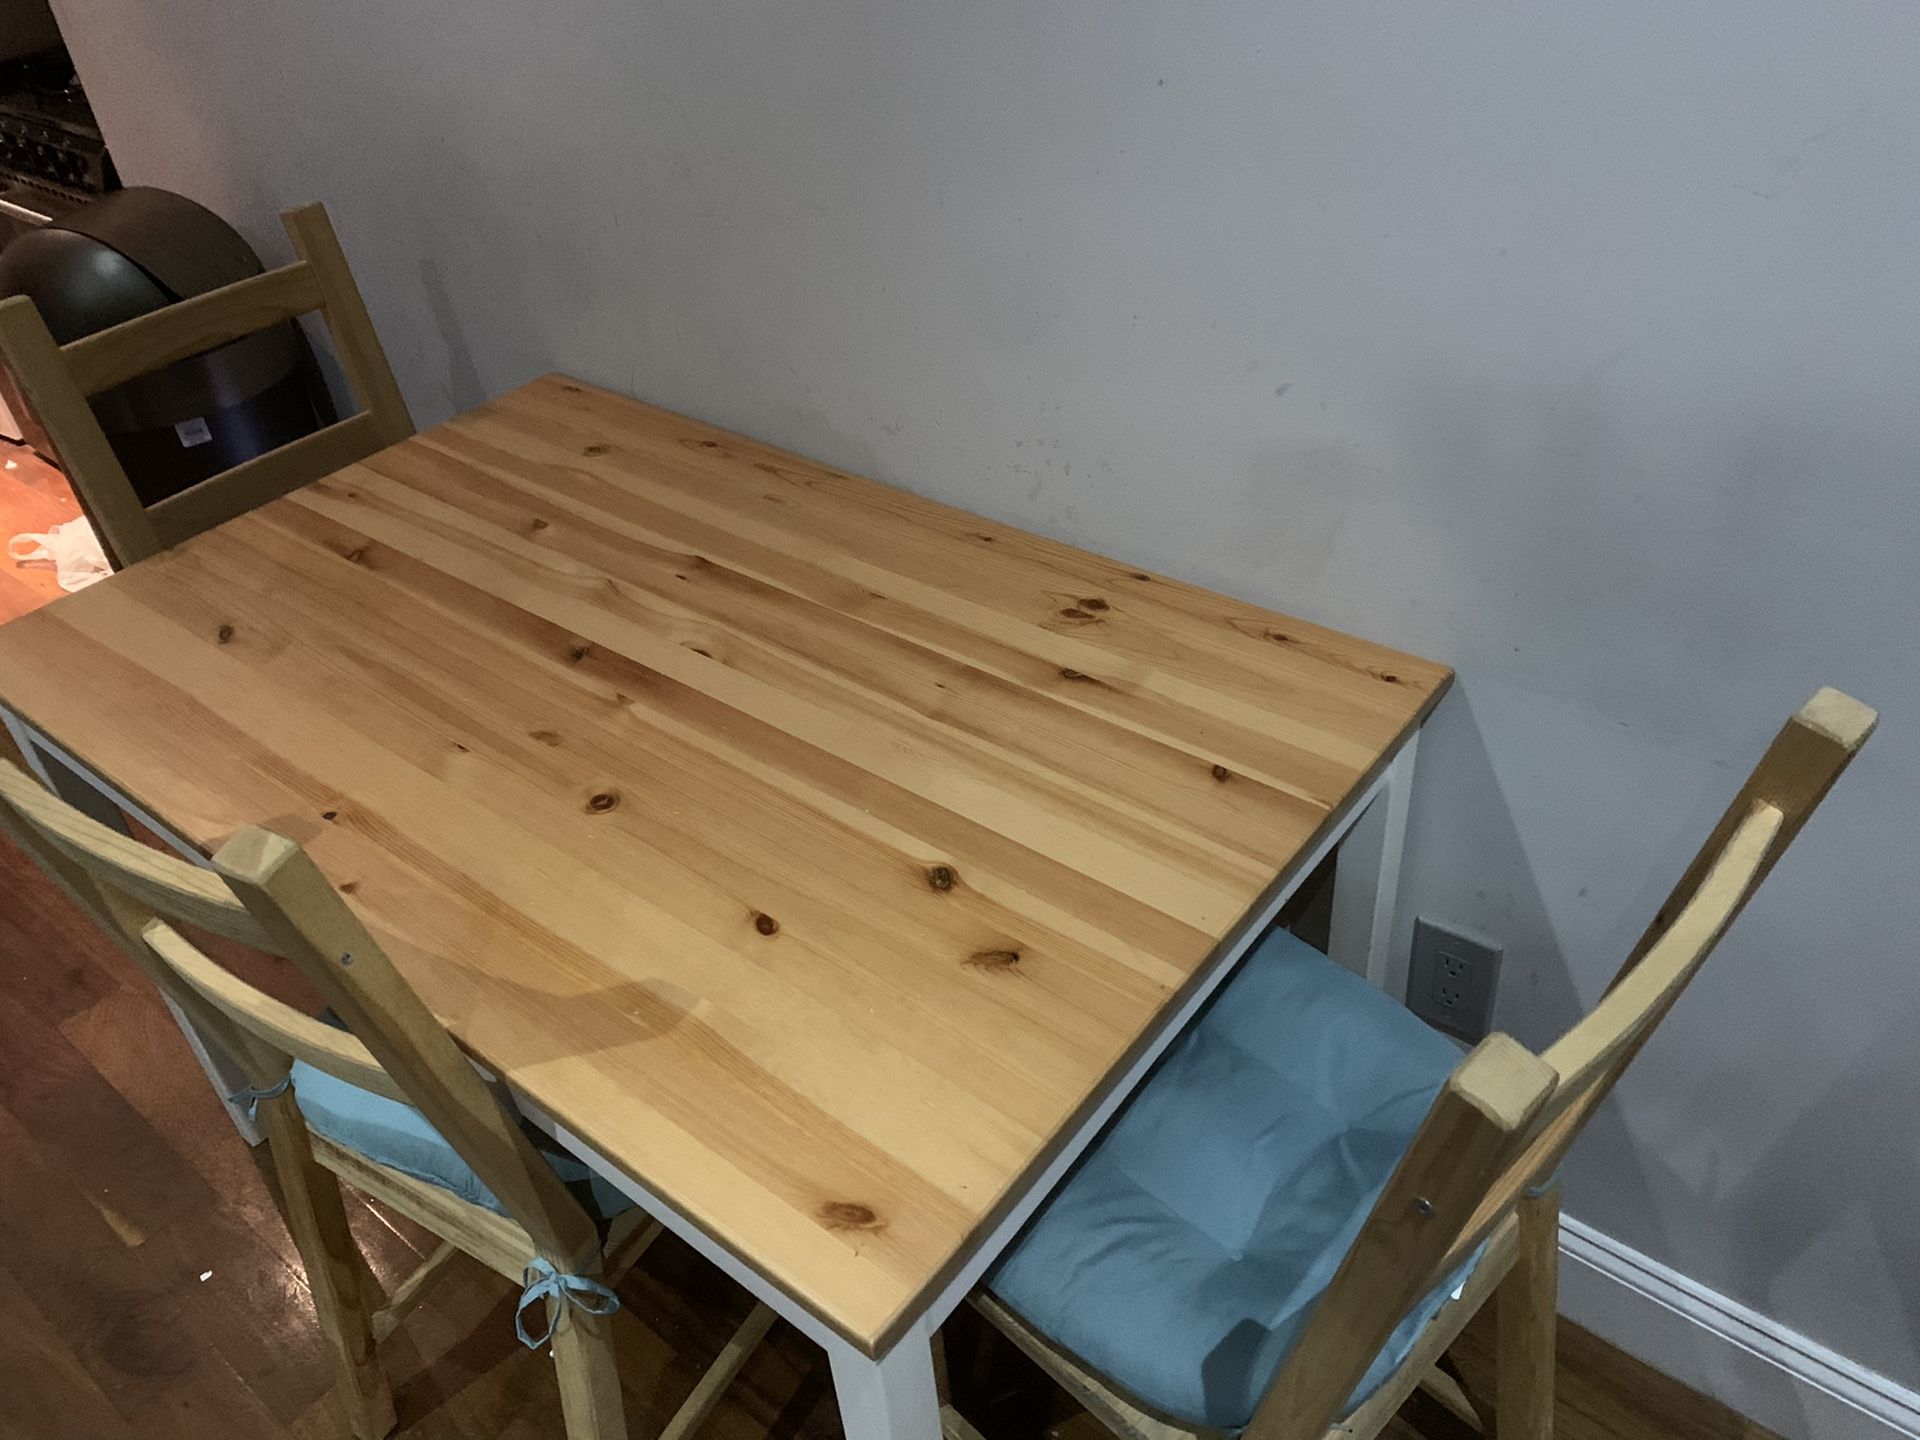 Free! Pick up in East Harlem. Dining table, includes 4 chairs